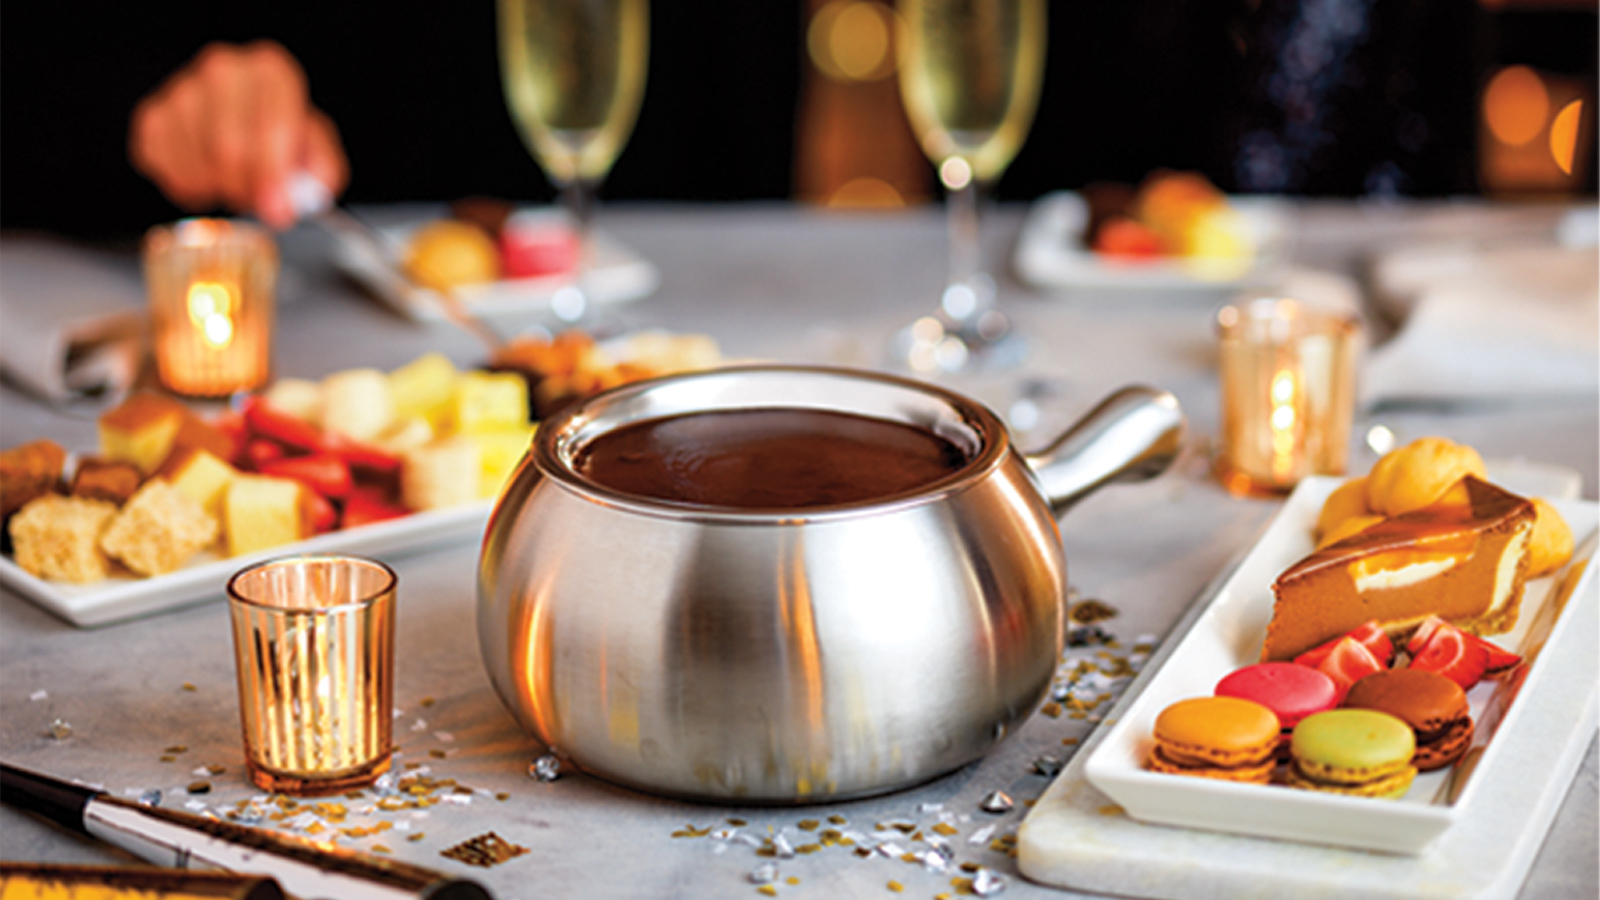 Celebrate the New Year at Melting Pot